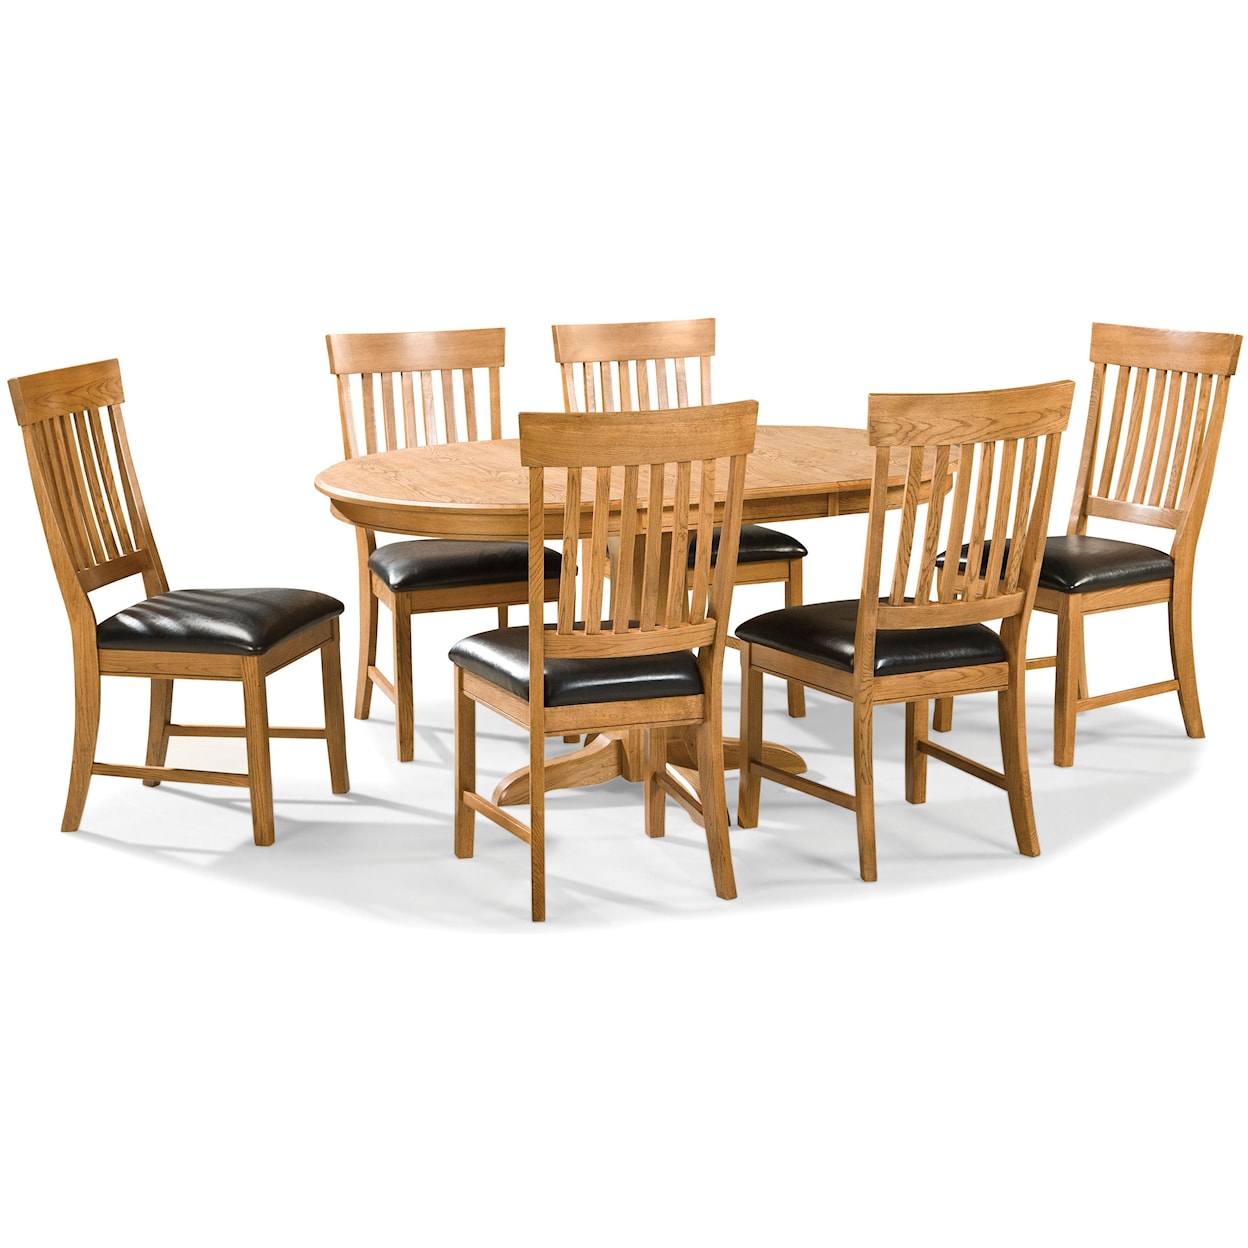 VFM Signature Family Dining Dining Chair with Slat Back